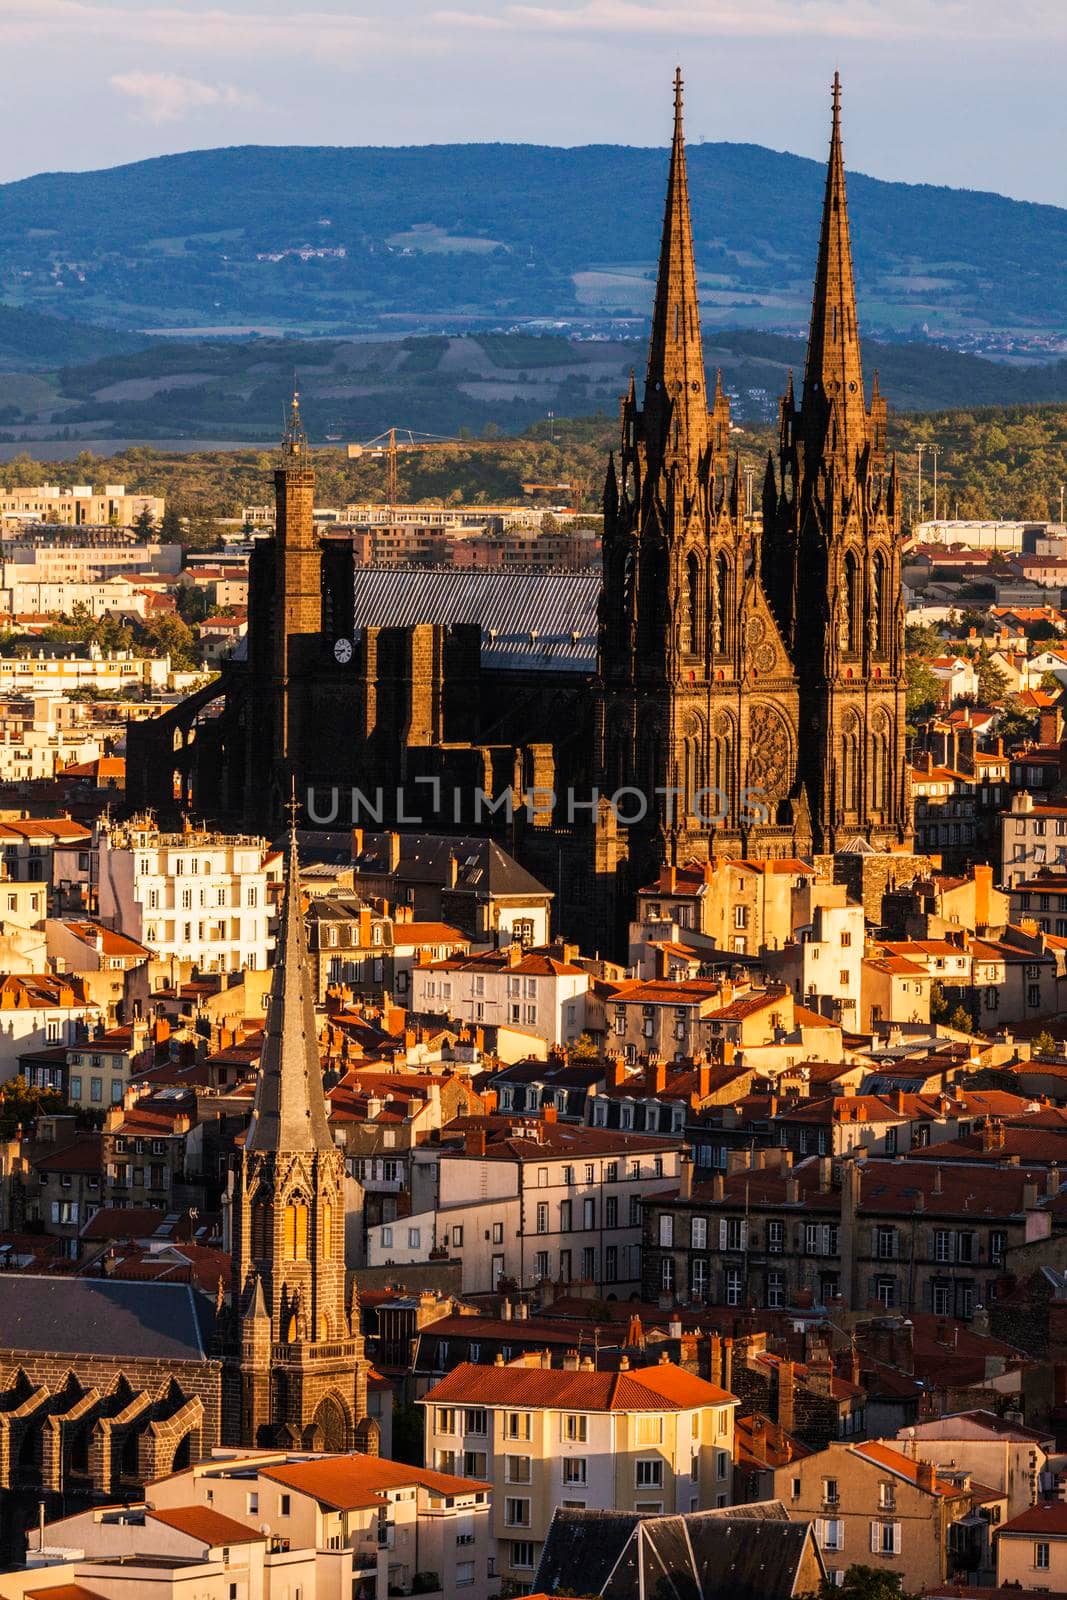 Clermont-Ferrand Cathedral at sunset. Clermont-Ferrand, Auvergne-Rhone-Alpes, France.